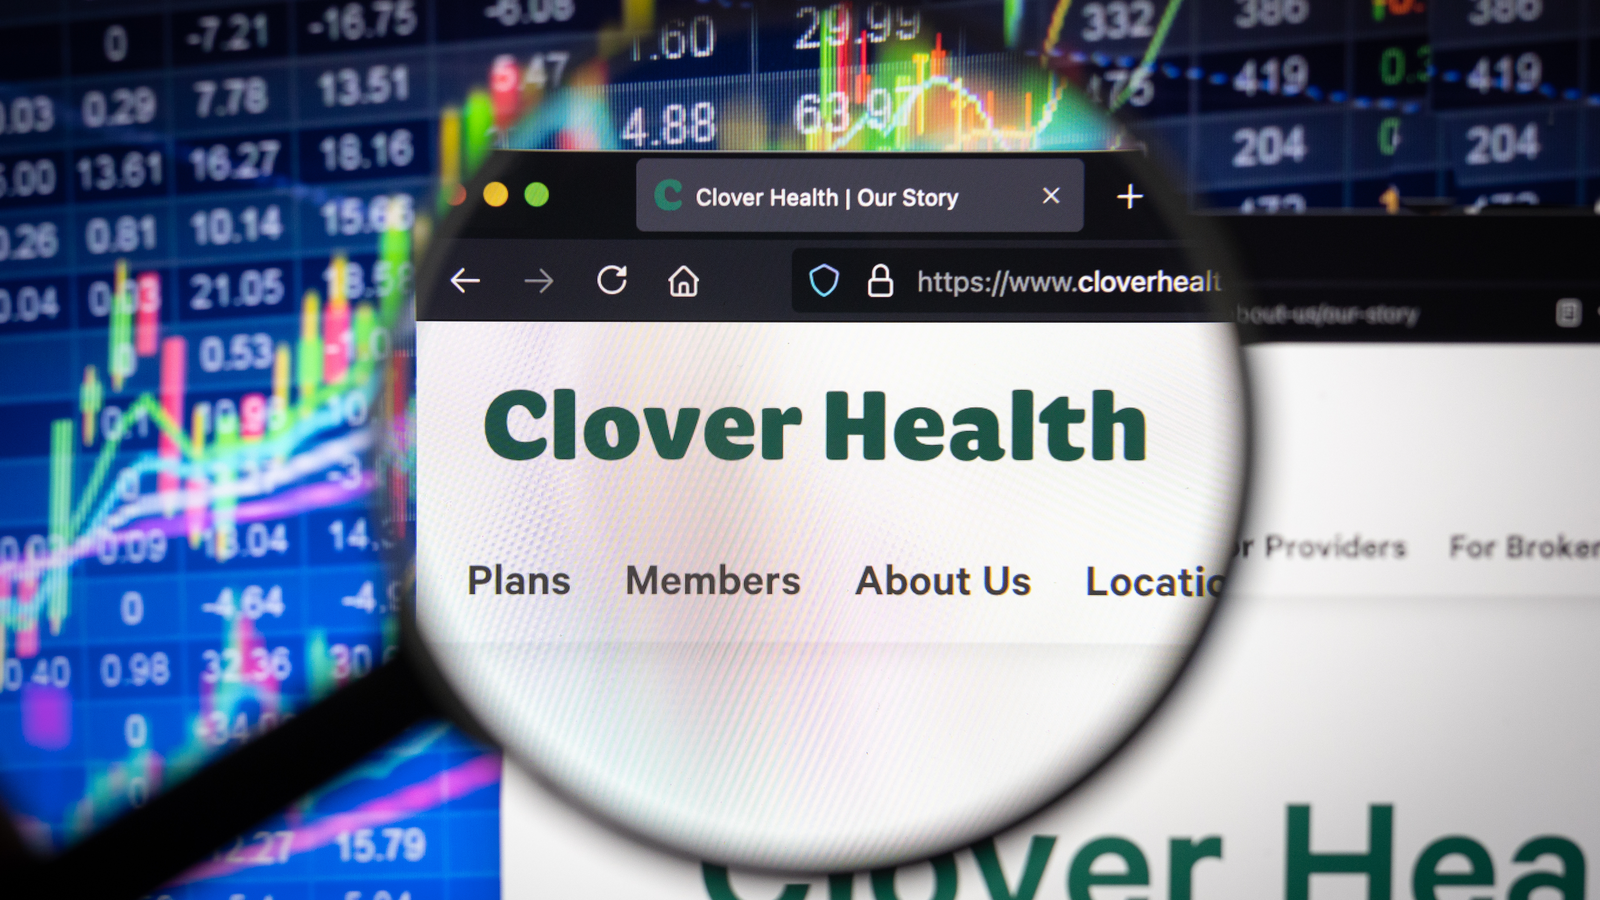 Clover Health (CLOV) company logo on a website with blurry stock market developments in the background, seen on a computer screen through a magnifying glass.